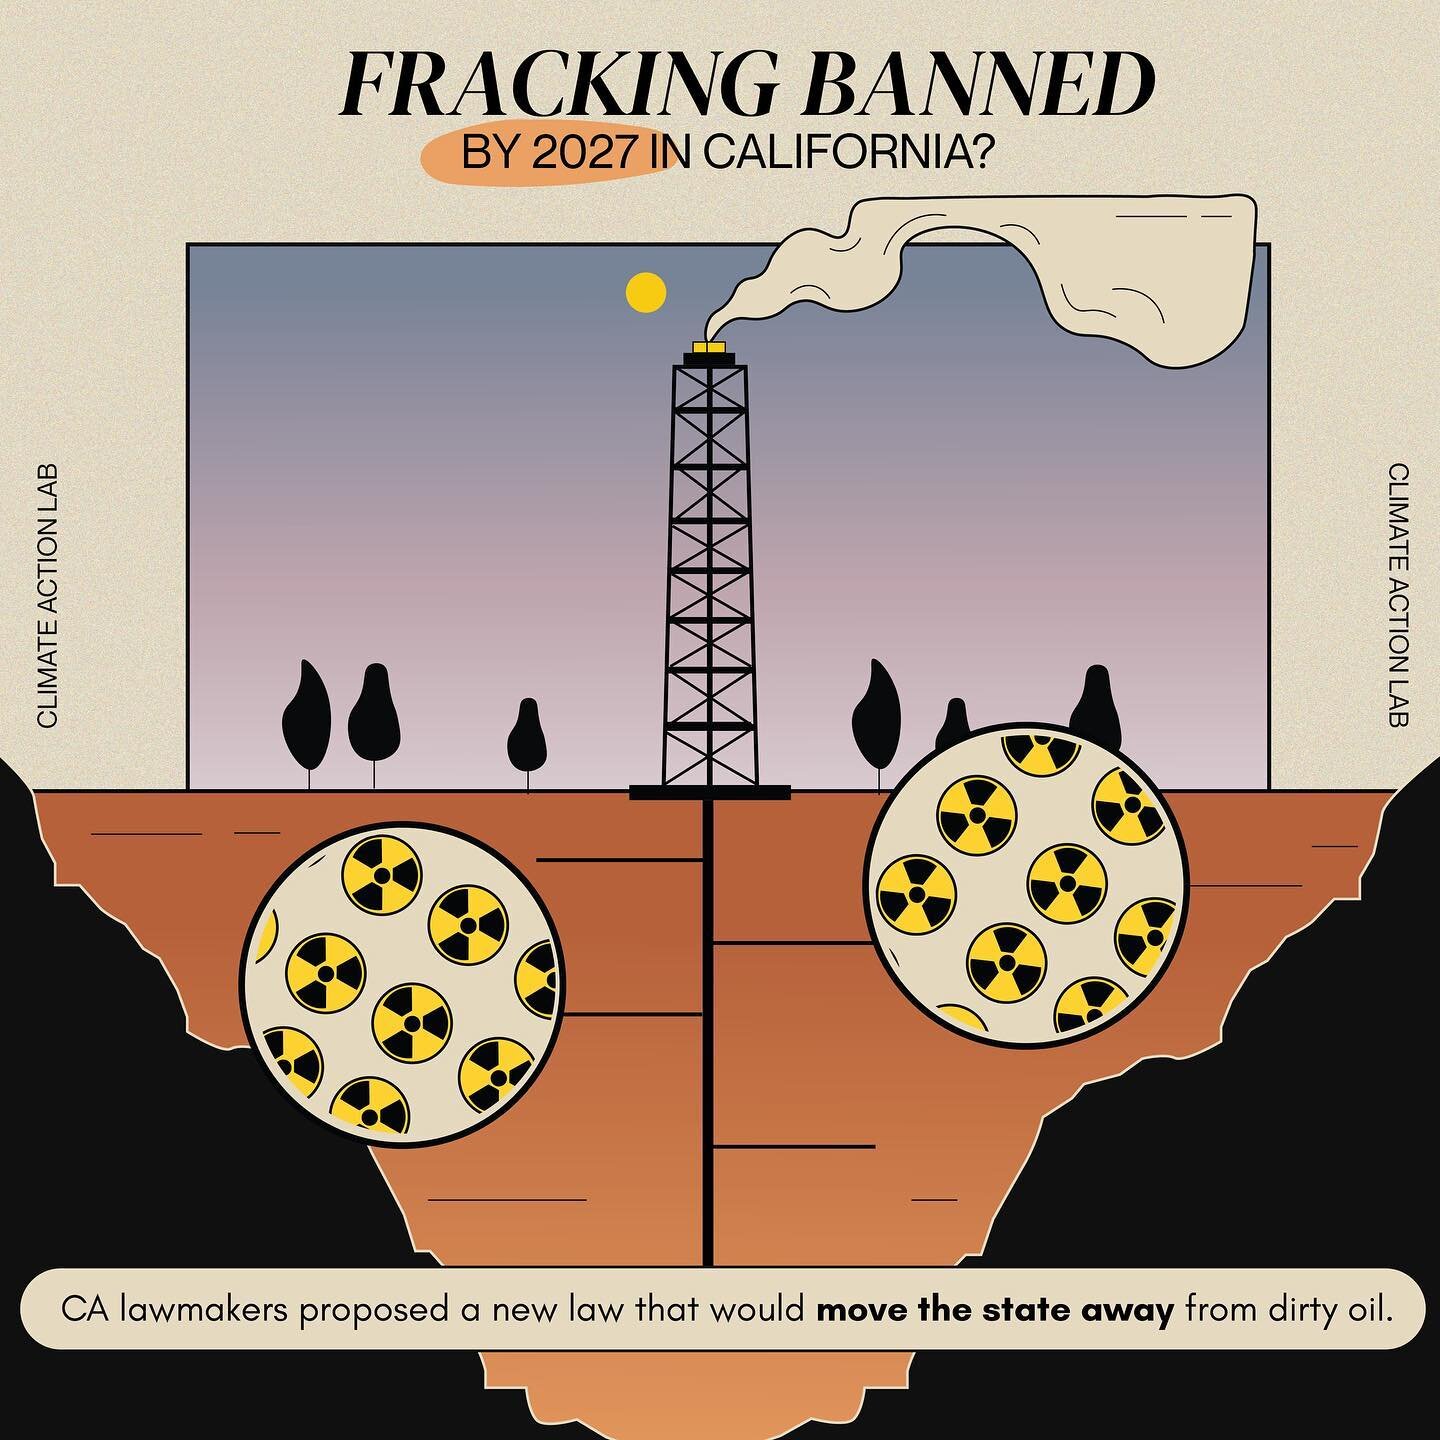 California lawmakers have proposed a bill that would ban all hydraulic fracking in CA by 2027! 😌🛢🚫🌎

Hydraulic fracturing, or fracking, is a technique used to extract huge amounts of oil and gas from shale rock deep underground. It involves injec